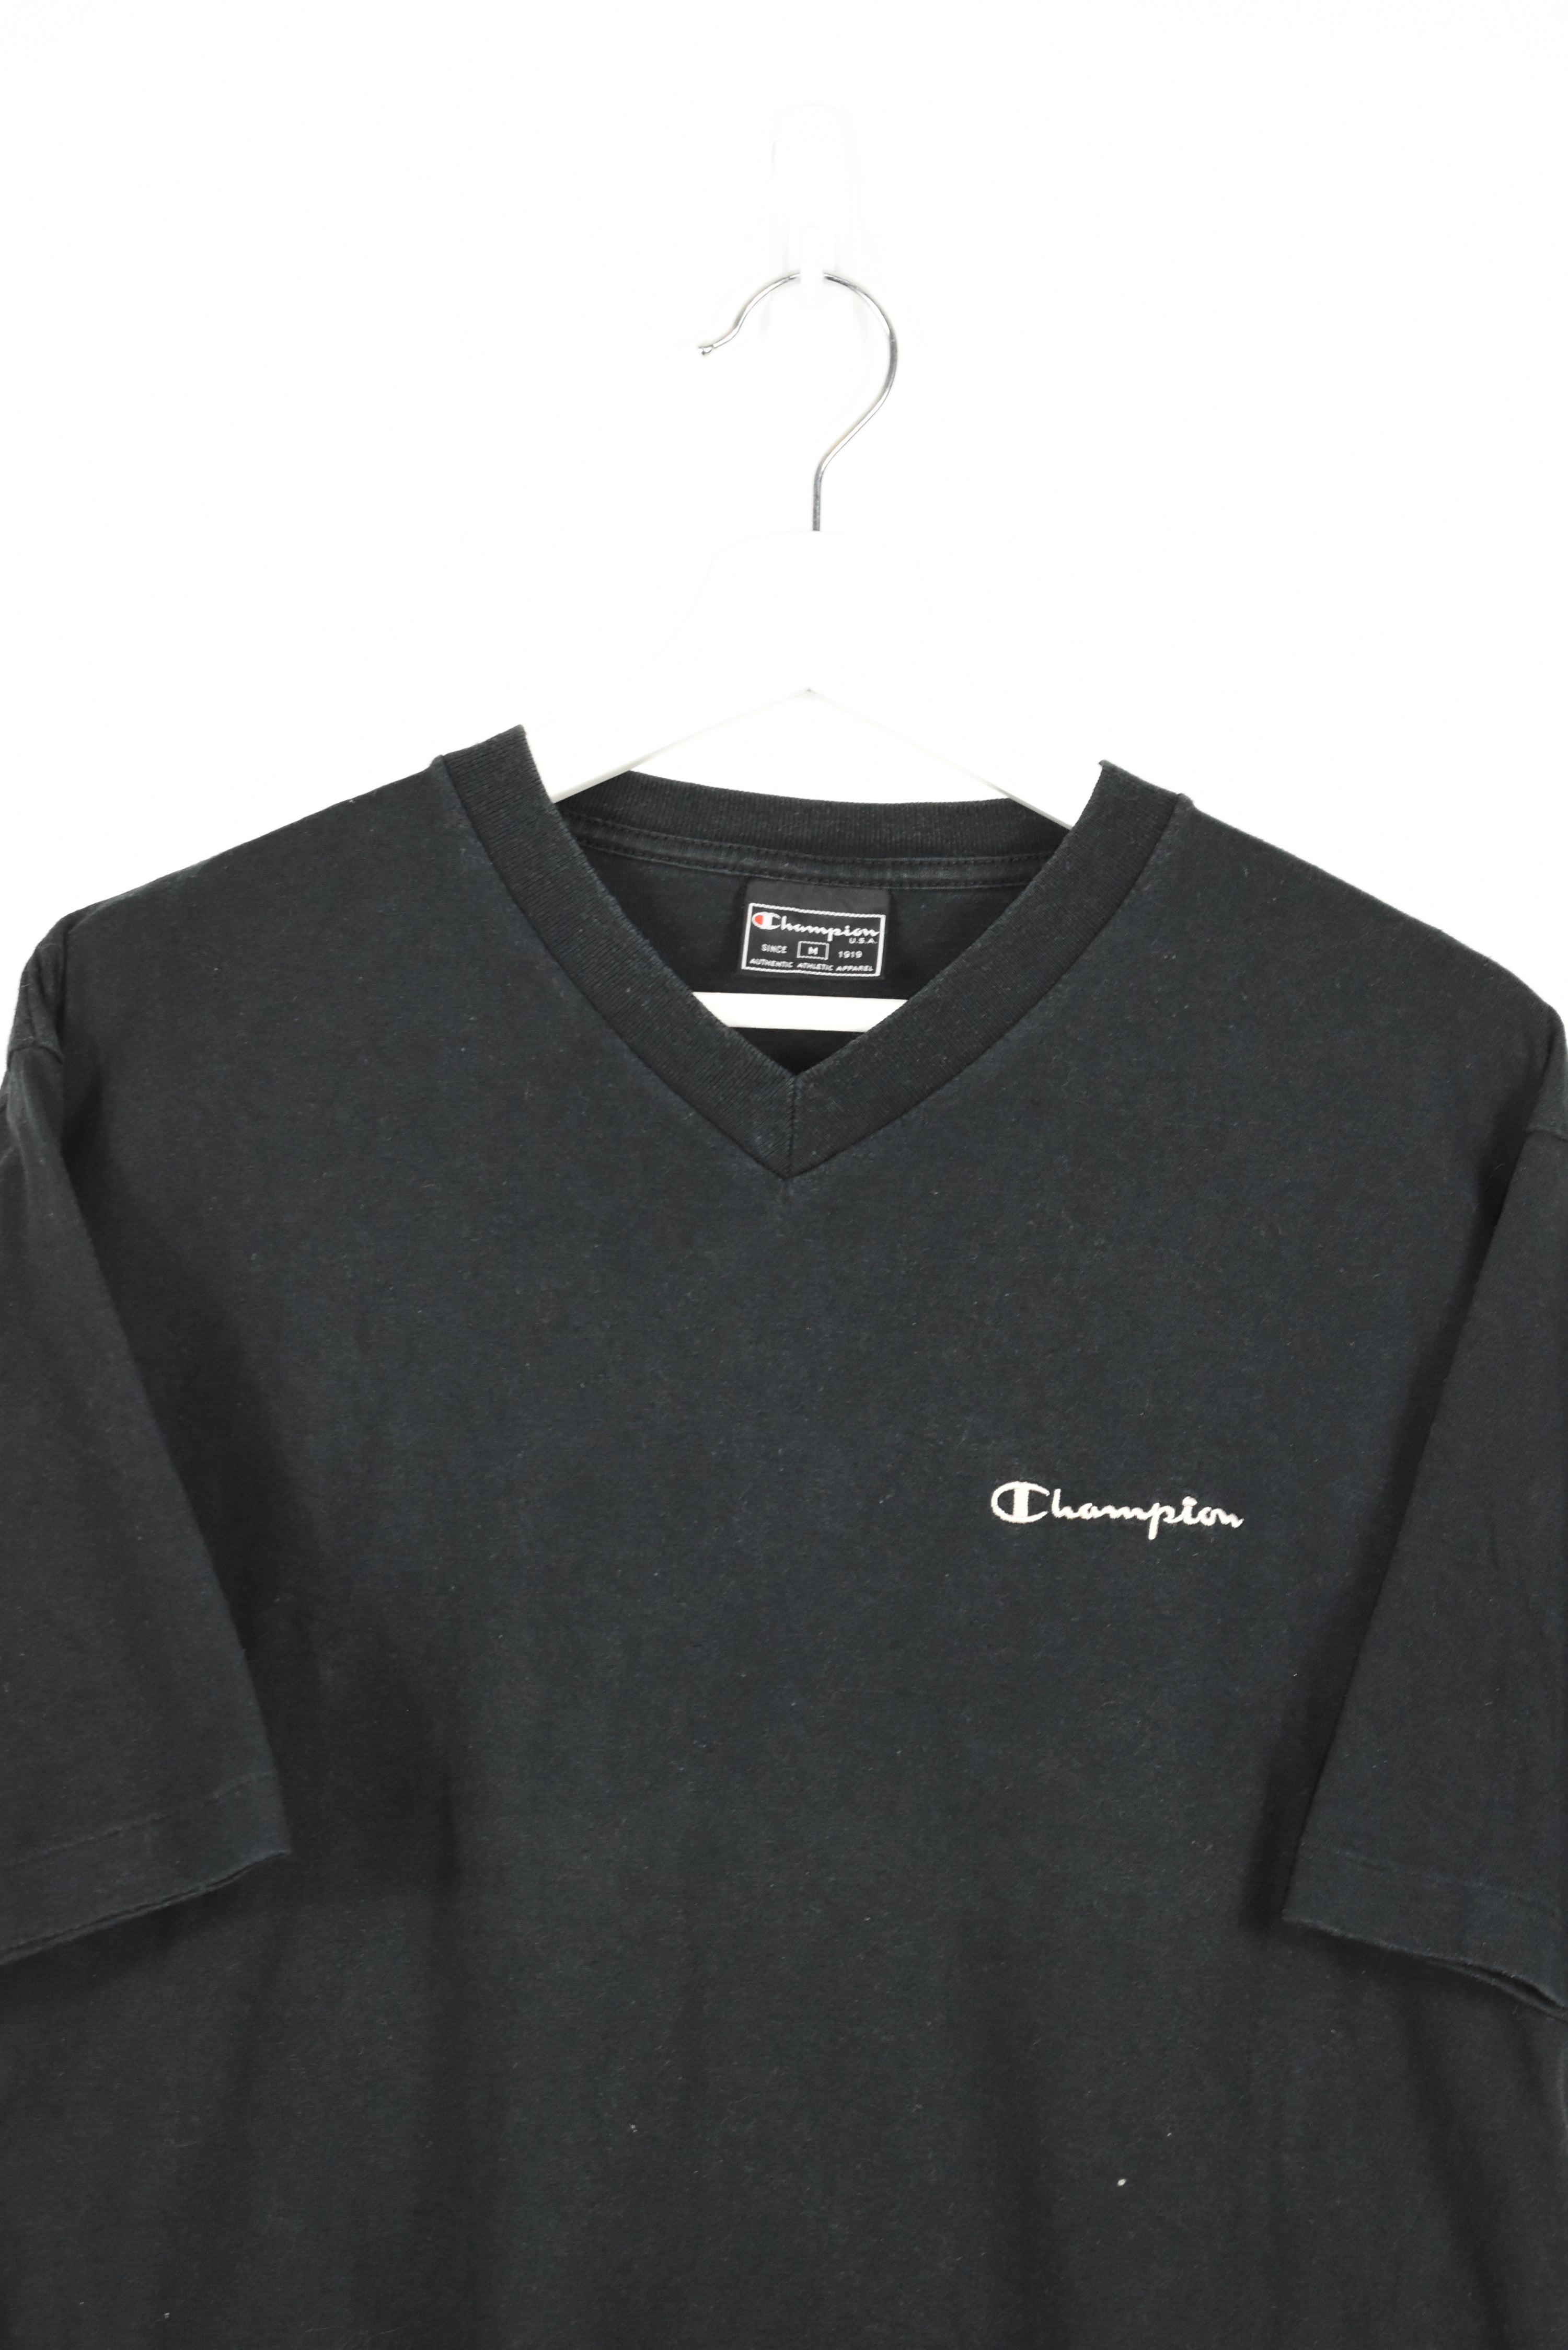 Vintage Champion Embroidery Small Logo Tee Large